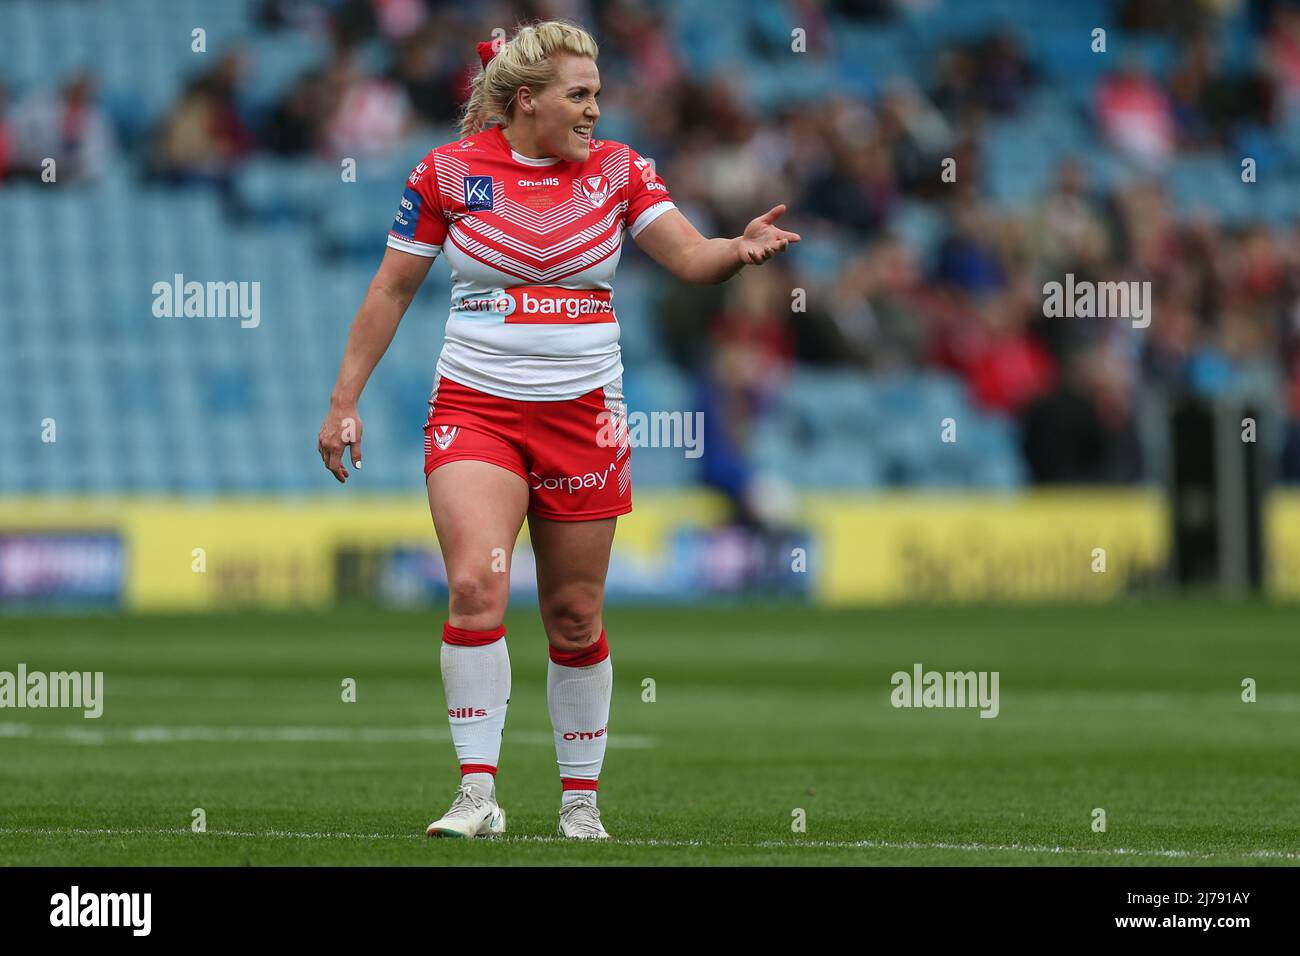 Amy Hardcastle #4 of St Helens during the game Stock Photo